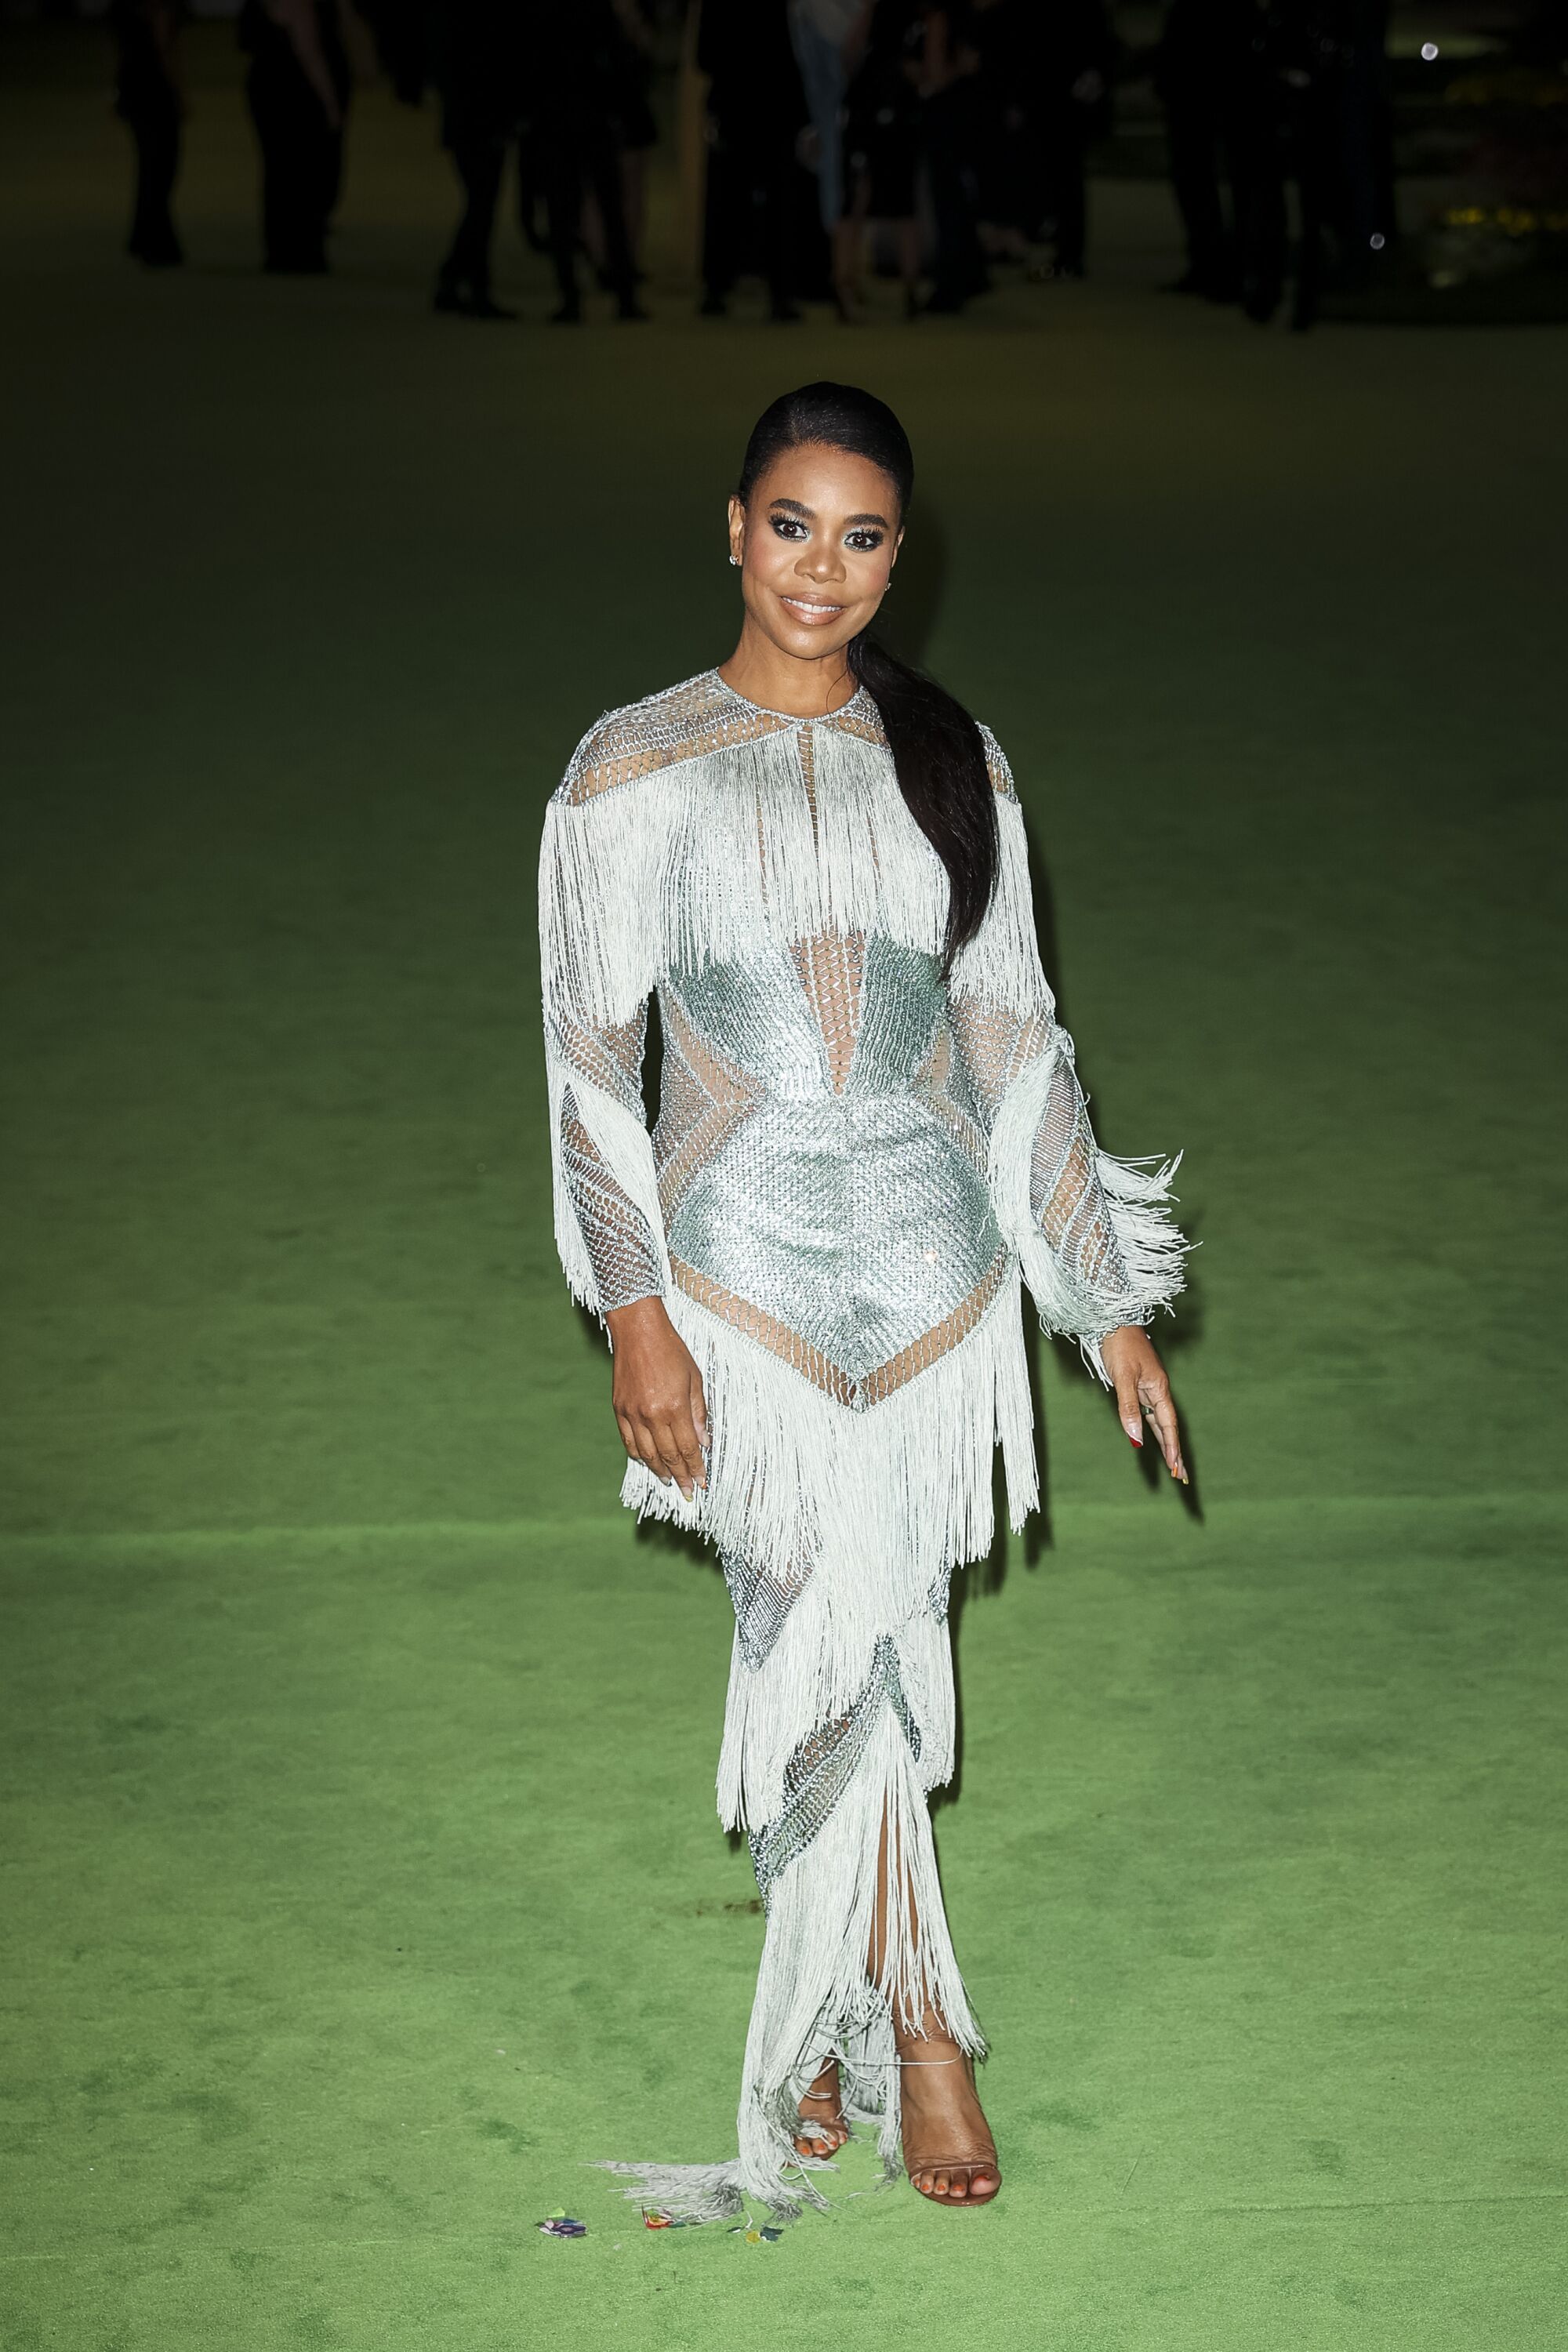 A woman in a silver, fringe dress posing on a green carpet